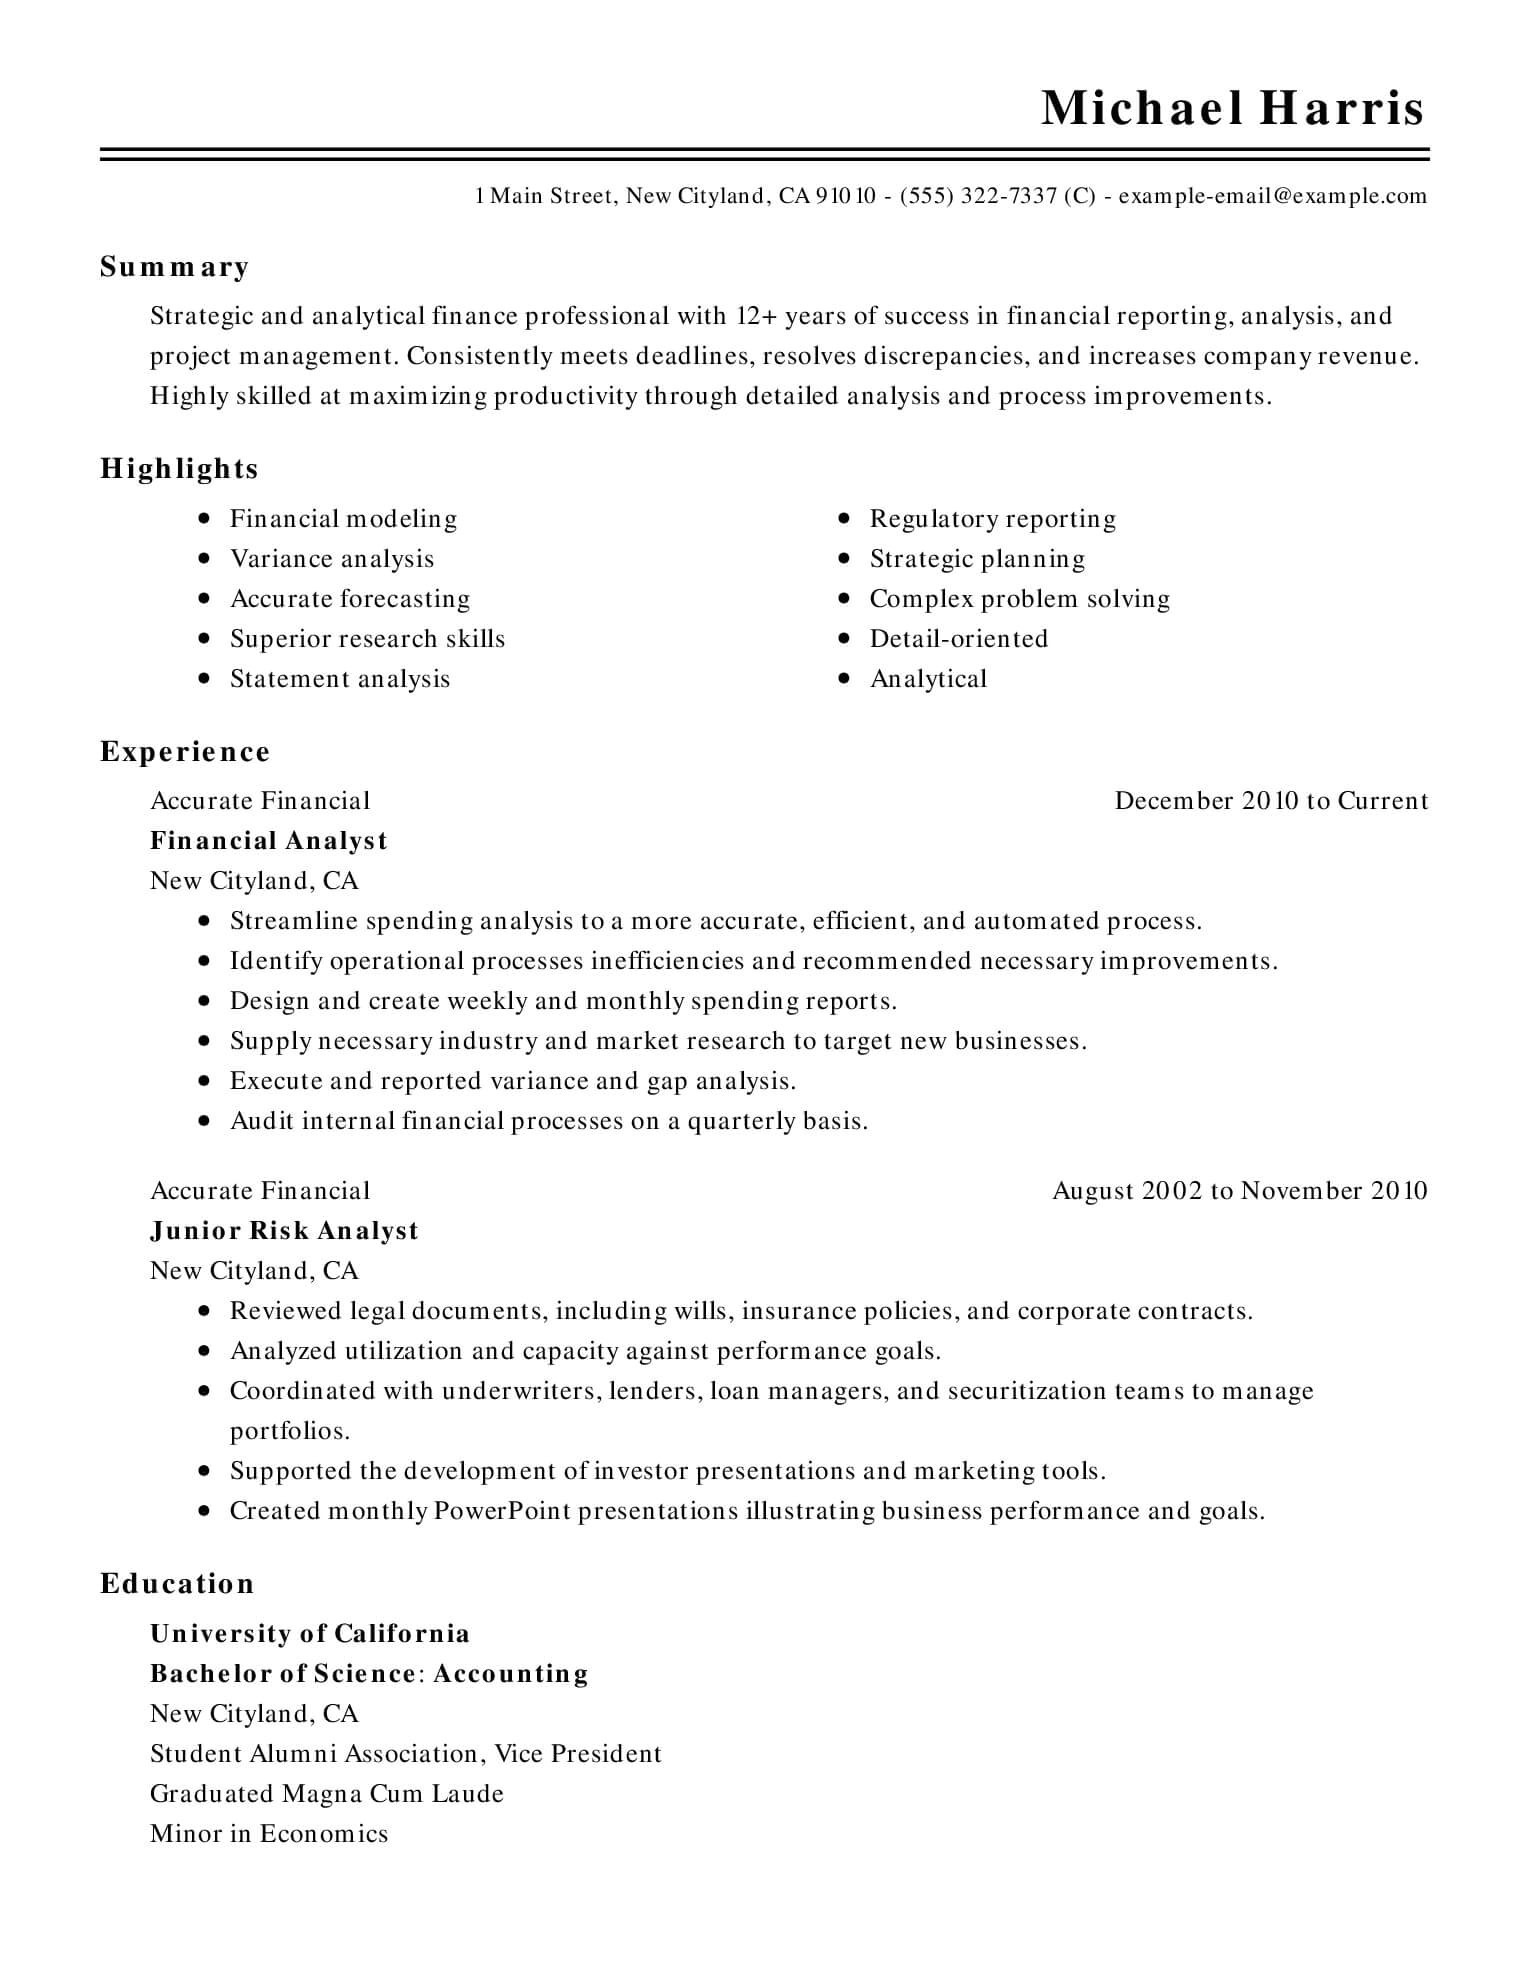 Sample Resume Download In Ms Word Resume for Job Interview Ms Word